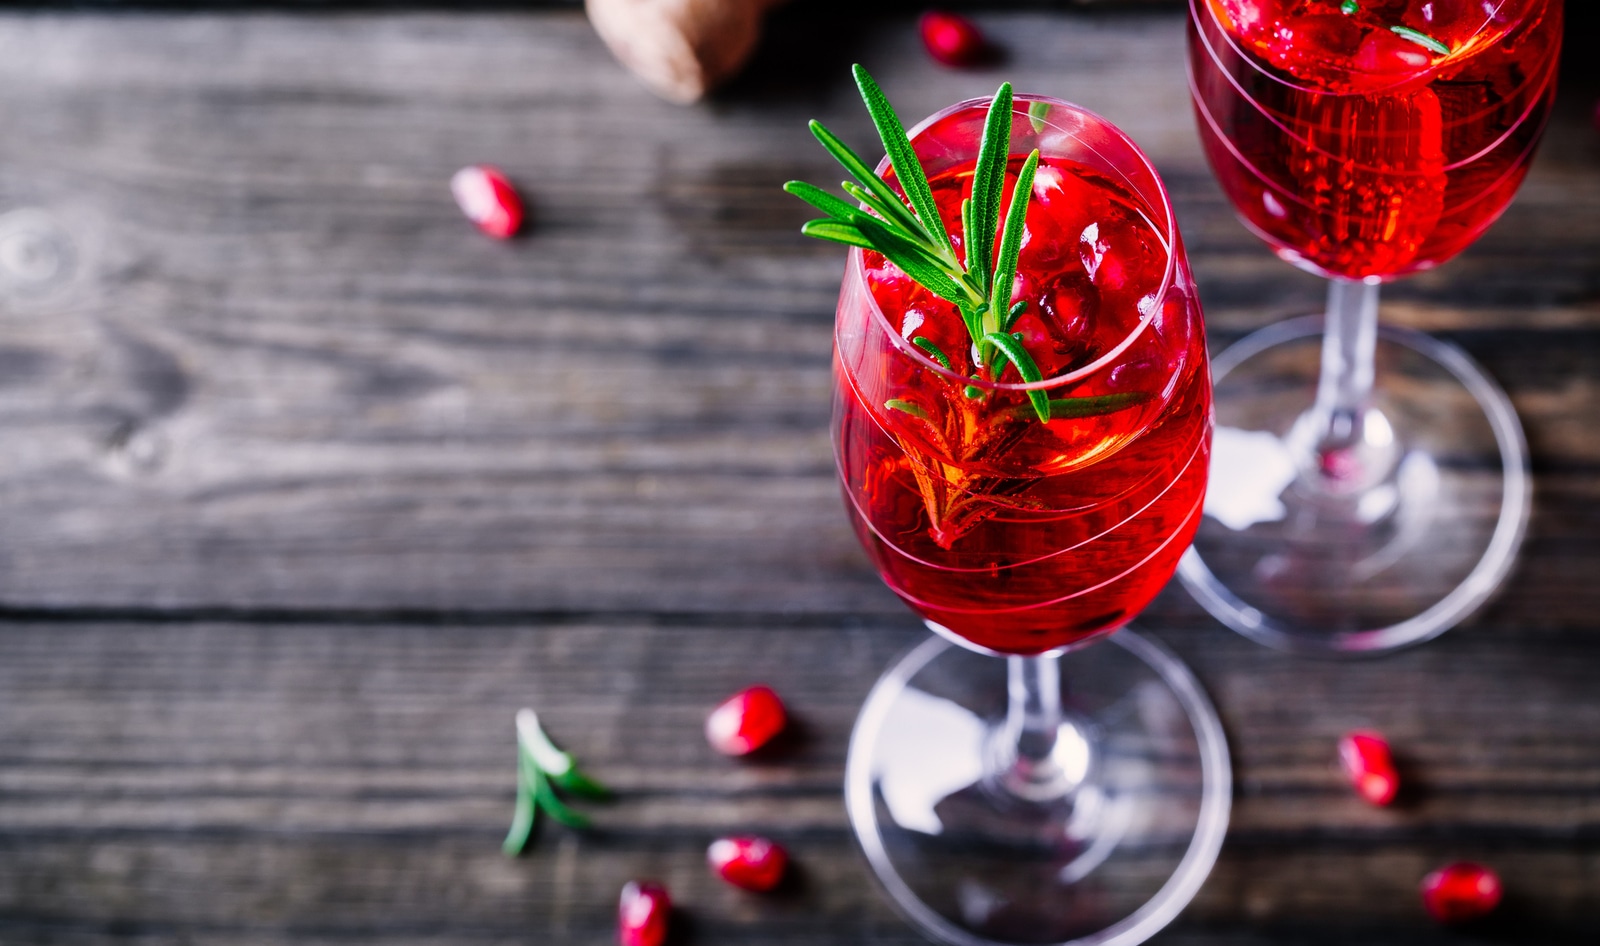 5 Festive Vegan Holiday Drinks for Your Thanksgiving Feast